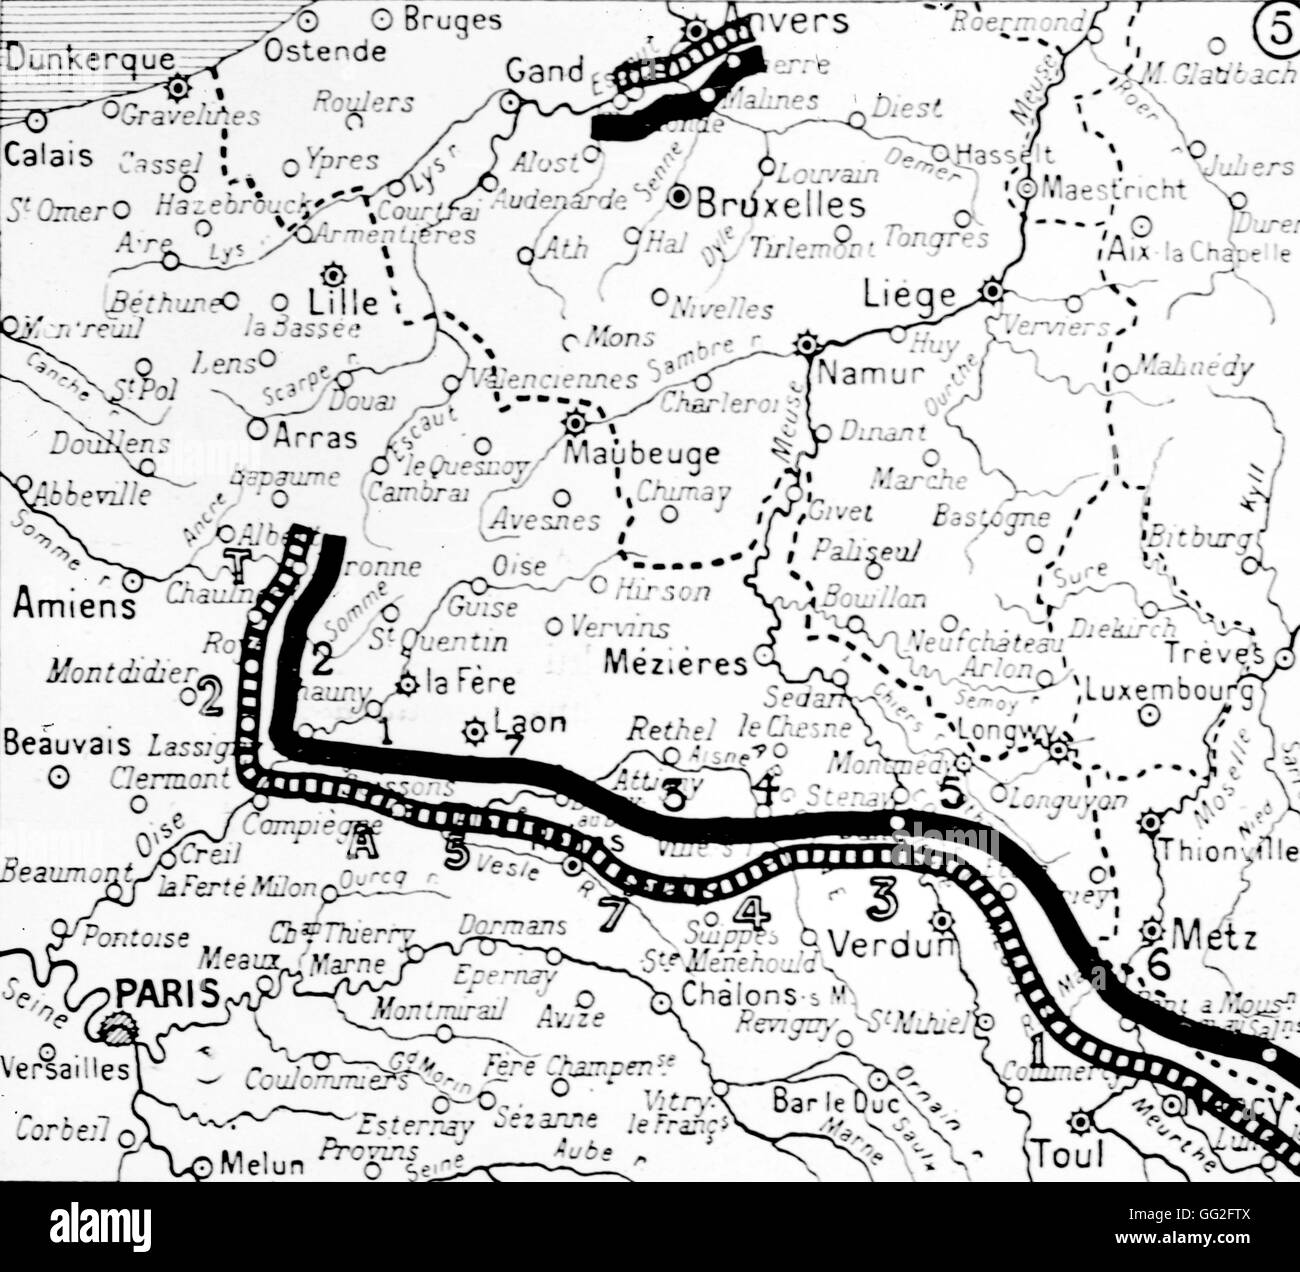 First World War. Map of the location of the armies on the 21st September 1914. T denotes the territorial groups of General Brugère. Stock Photo